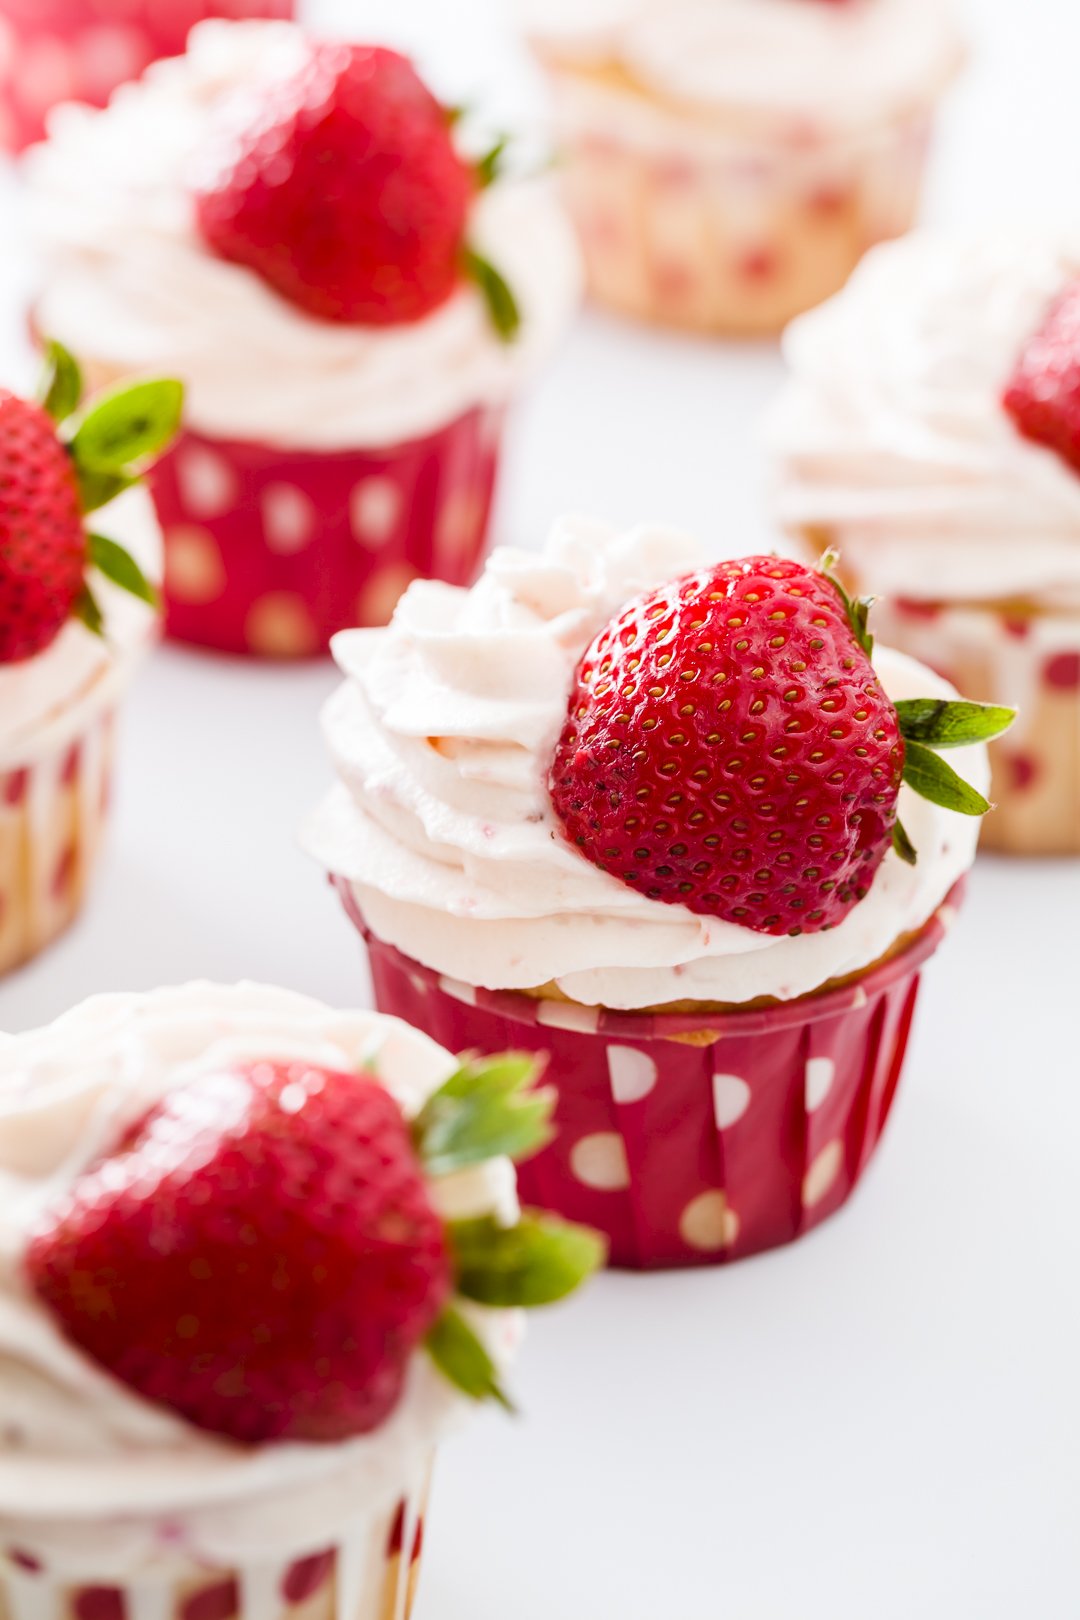 Vanilla Cupcakes with Strawberry Whipped Cream Frosting | Cupcake Project